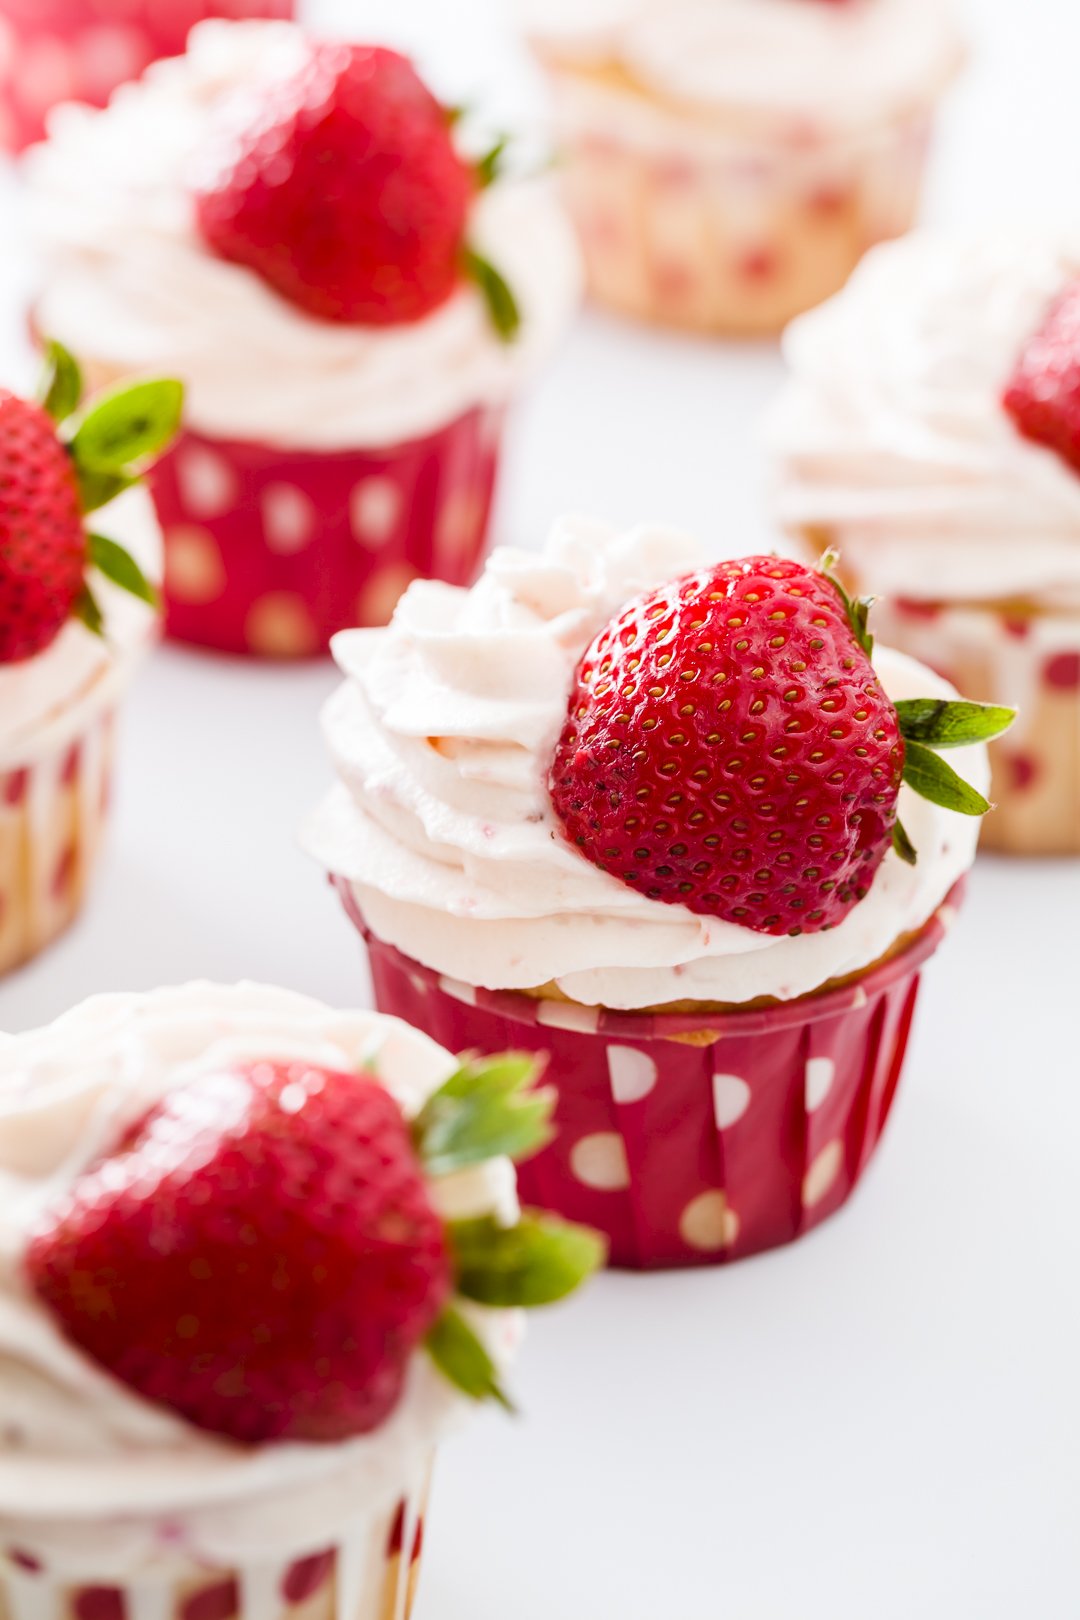 Vanilla Cupcakes with Strawberry Whipped Cream Frosting | Cupcake Project